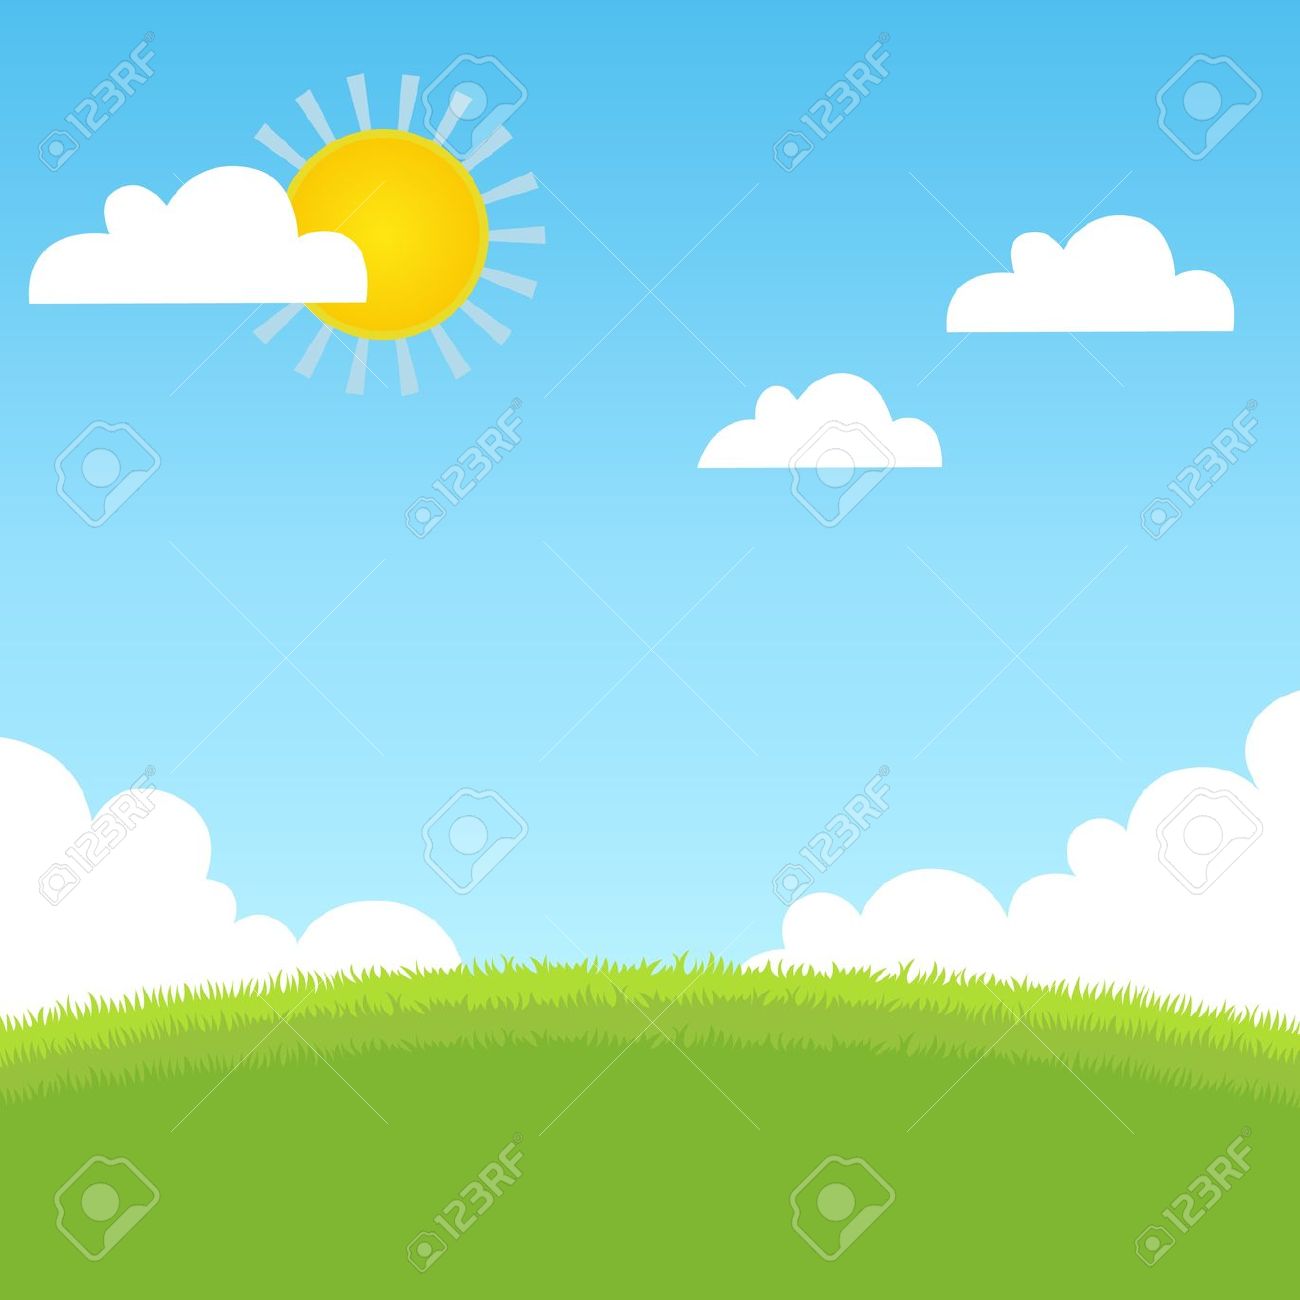 clipart sky background - photo #41